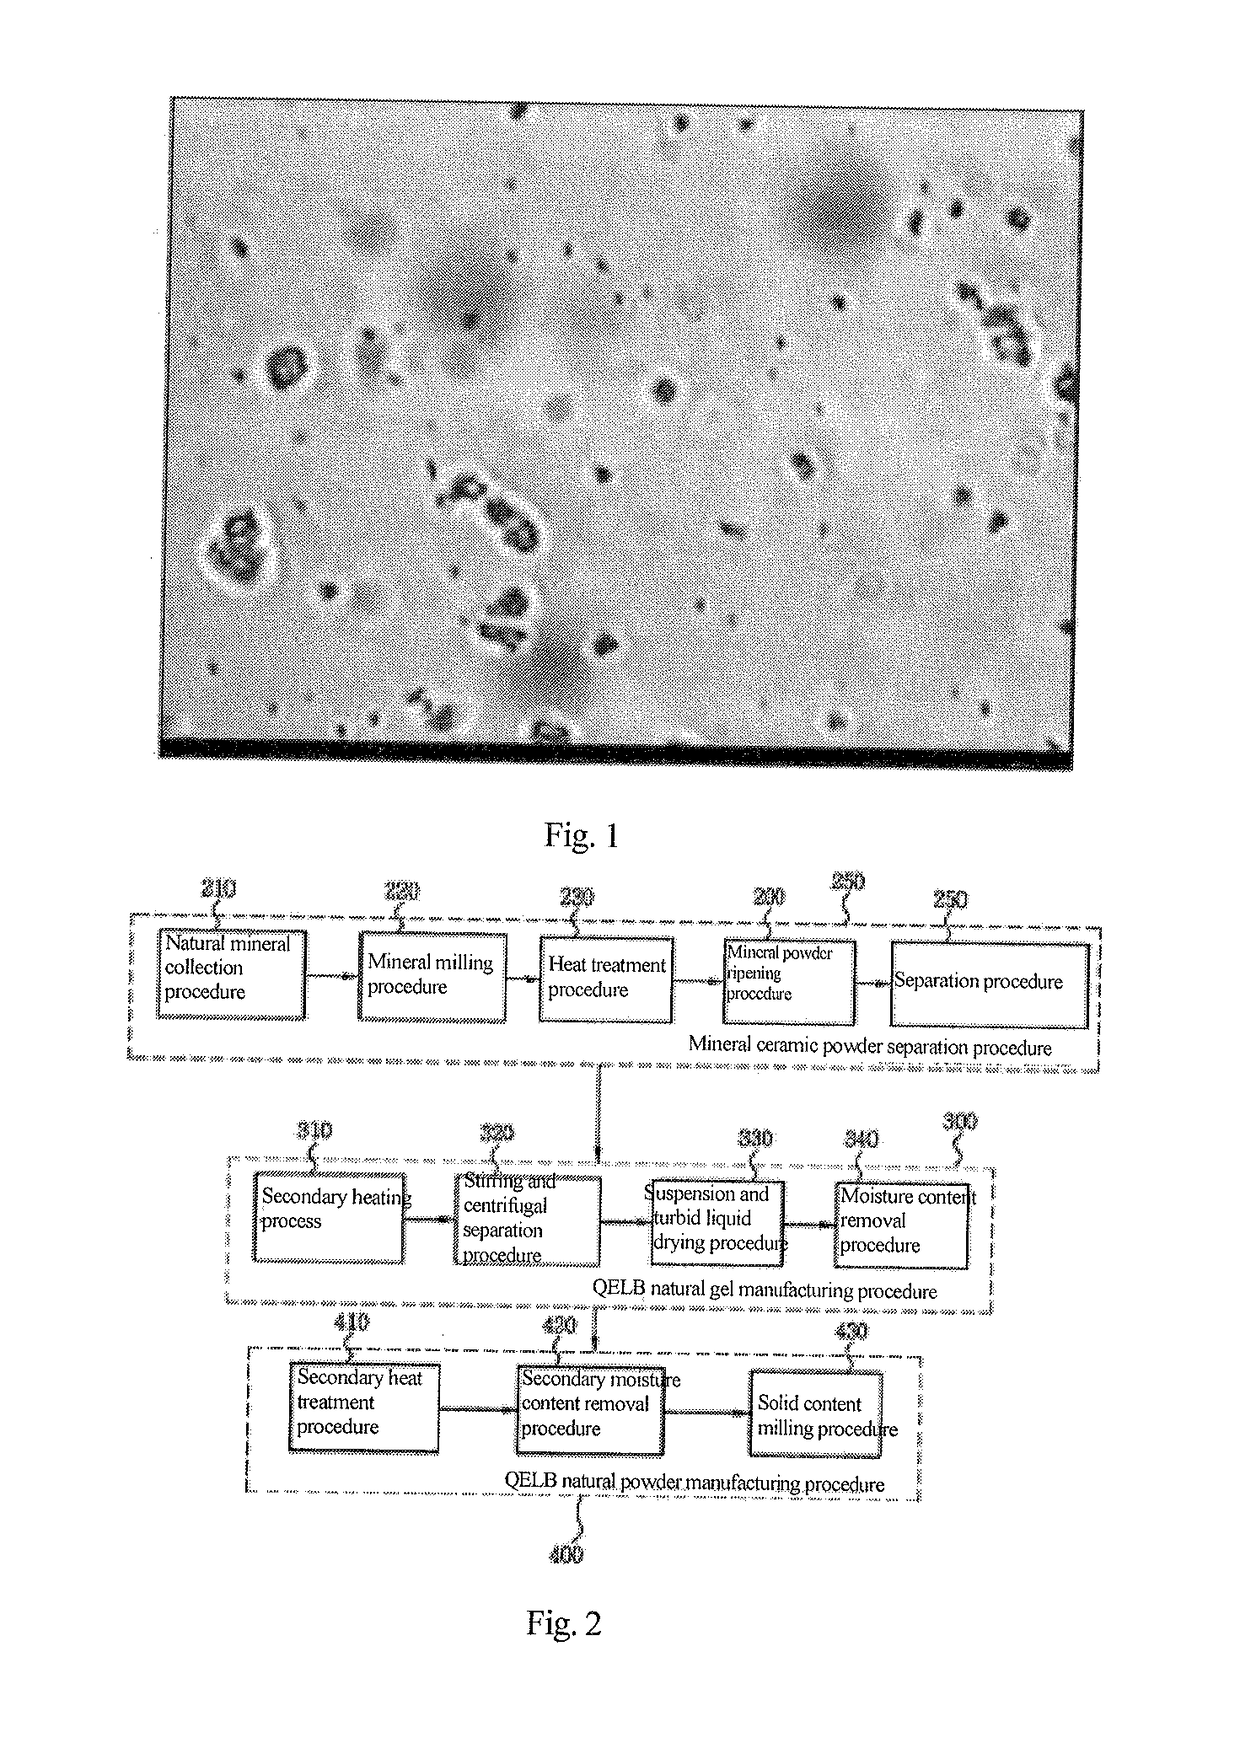 Method for preparing multifunctional natural gel and natural powder by using mineral-based somatids contained in natural mineral